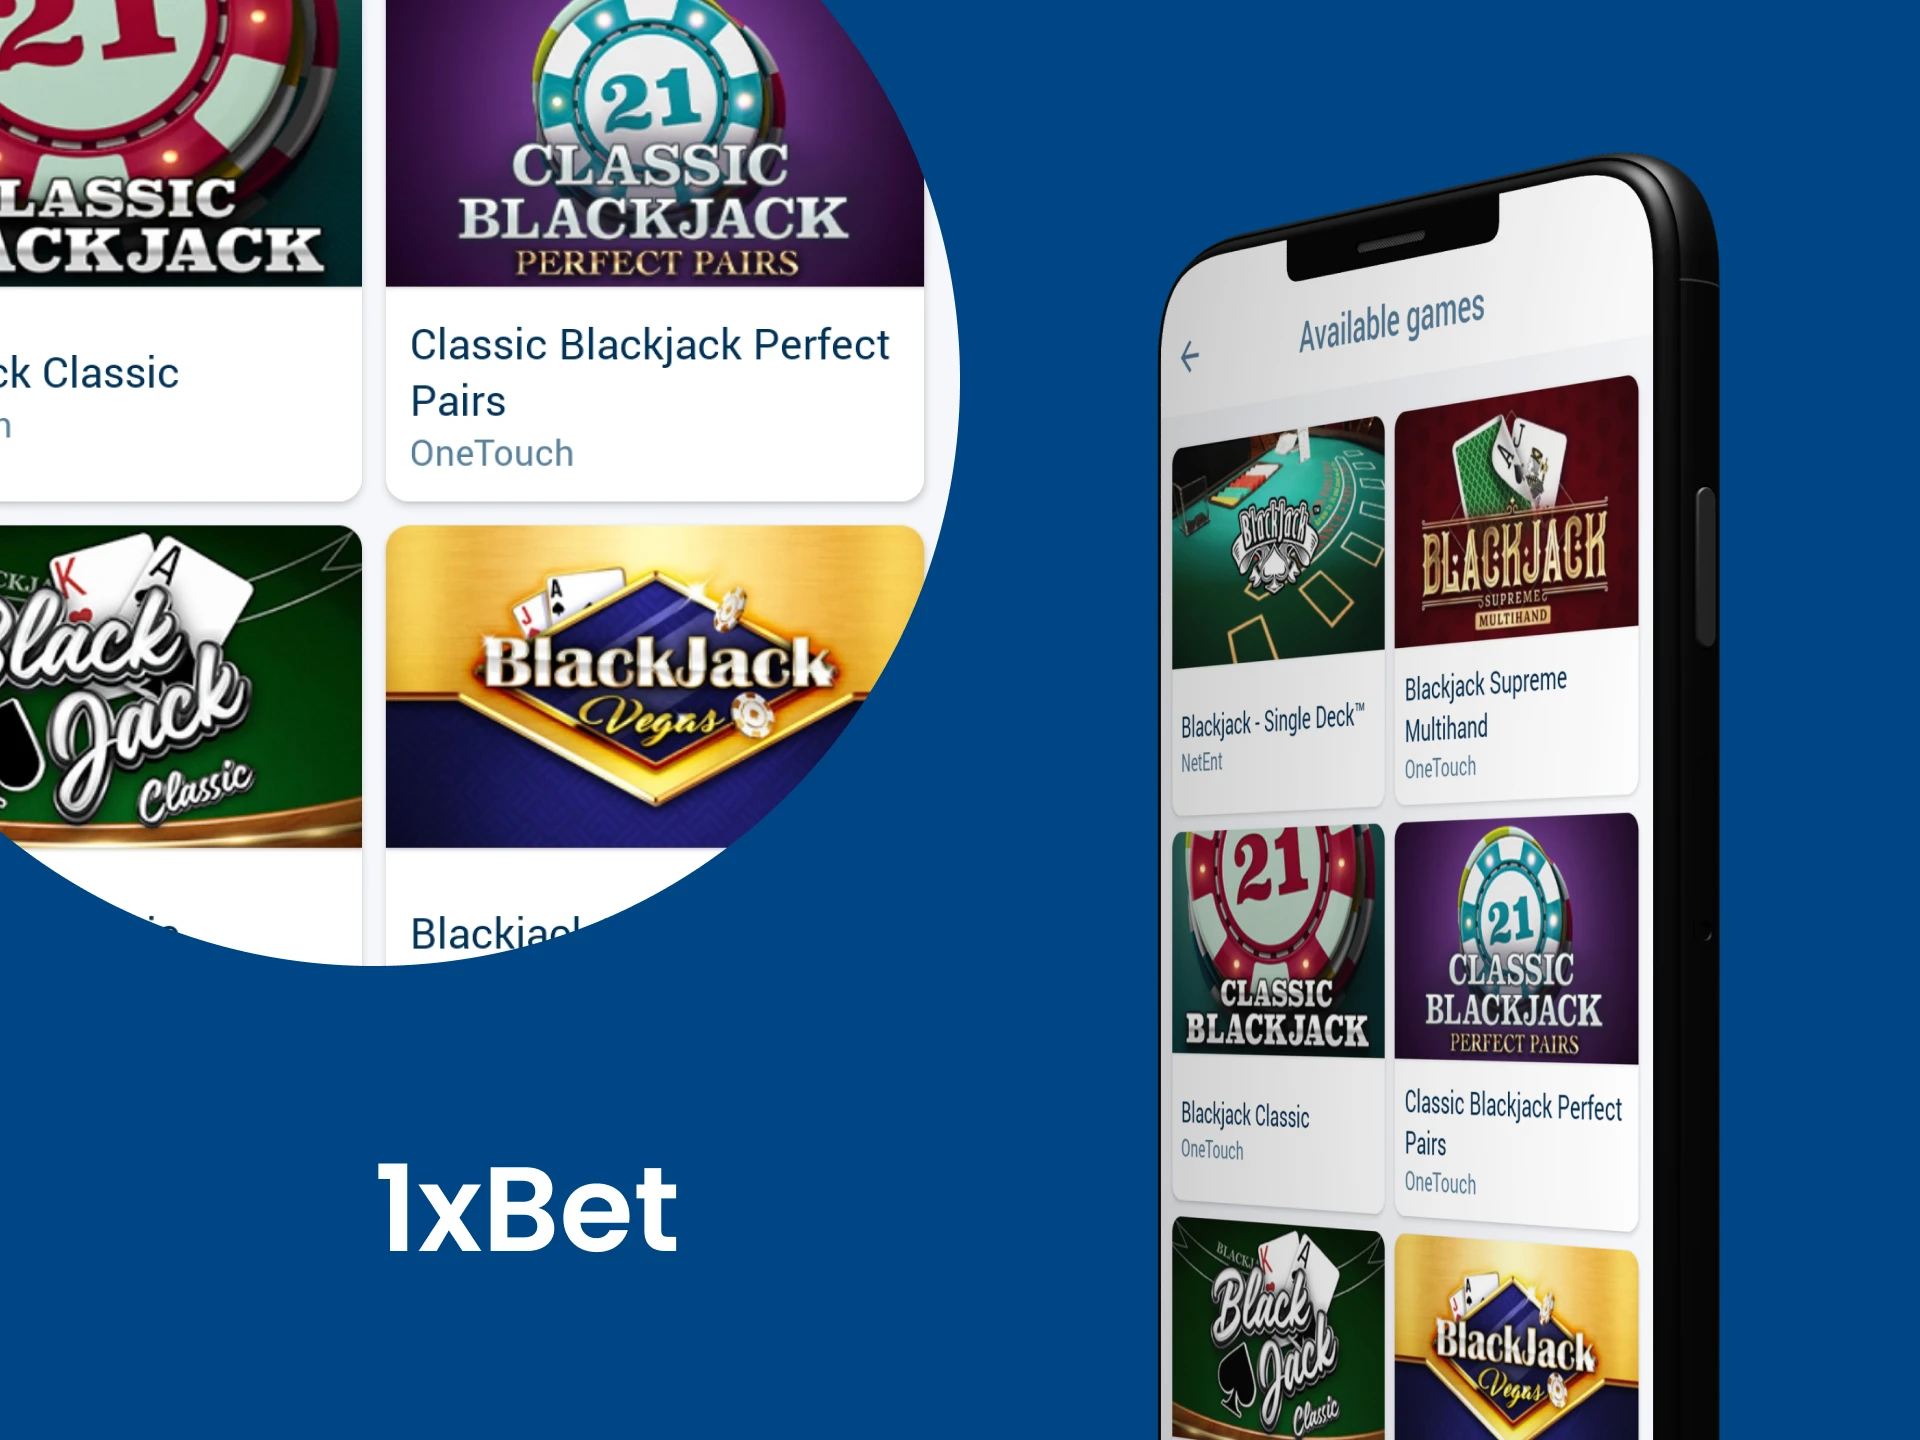 Play BlackJack on your smartphone using the 1xbet app.